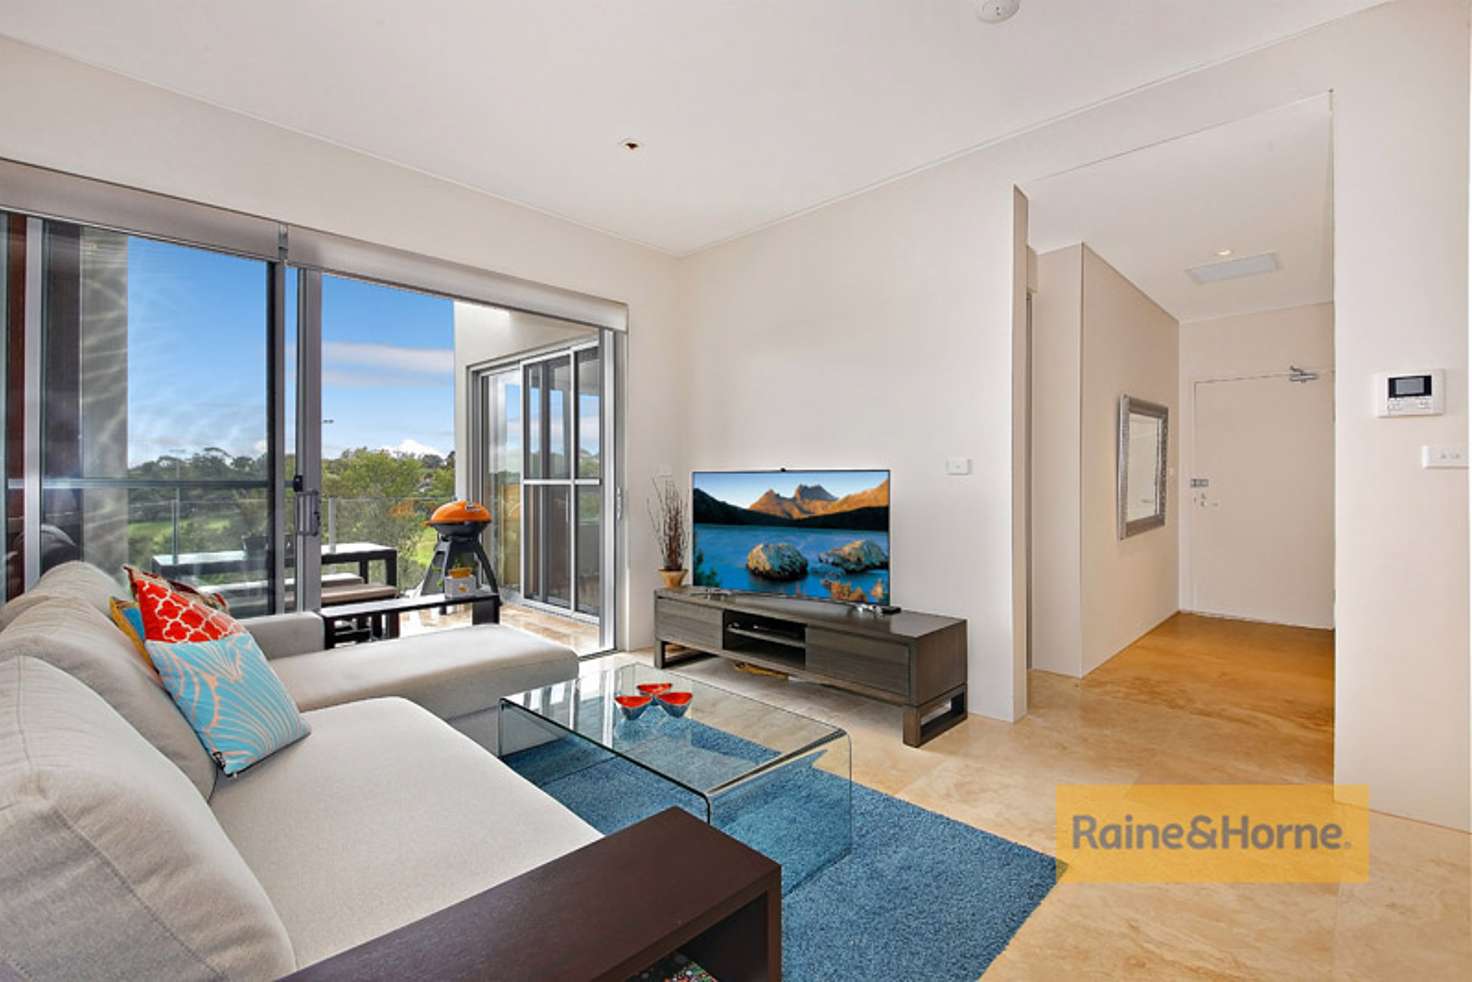 Main view of Homely apartment listing, 15/27-33 Homer Street, Earlwood NSW 2206